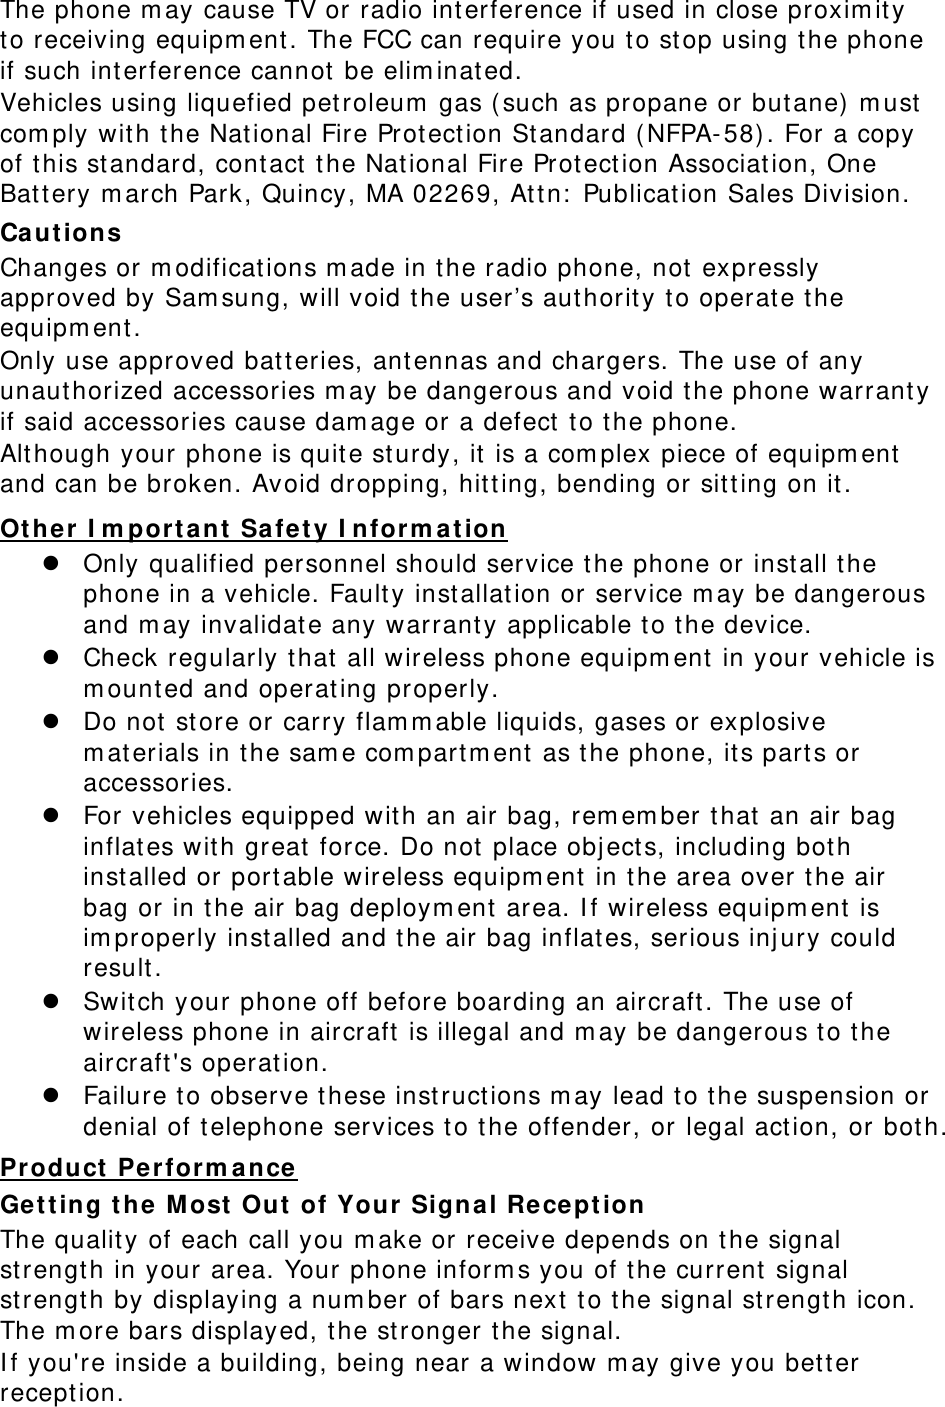 The phone m ay cause TV or radio int erference if used in close proxim ity to receiving equipm ent . The FCC can require you t o stop using the phone if such int erference cannot  be elim inat ed. Vehicles using liquefied petroleum  gas ( such as propane or butane)  m ust com ply wit h the Nat ional Fire Protect ion St andard ( NFPA- 58) . For a copy of t his standard, cont act the Nat ional Fire Protect ion Associat ion, One Battery m arch Park, Quincy, MA 02269, At tn:  Publication Sales Division. Ca ut ion s Changes or m odificat ions m ade in t he radio phone, not expressly approved by Sam sung, will void the user’s aut hority to operate t he equipm ent. Only use approved batt eries, ant ennas and chargers. The use of any unaut horized accessories m ay be dangerous and void t he phone warrant y if said accessories cause dam age or a defect to the phone. Alt hough your phone is quit e st urdy, it is a com plex piece of equipm ent  and can be broken. Avoid dropping, hitt ing, bending or sitting on it . UOt he r I m portant  Safety I nform ation z Only qualified personnel should service the phone or install t he phone in a vehicle. Fault y inst allat ion or service m ay be dangerous and m ay invalidate any warrant y applicable t o the device. z Check regularly that  all wireless phone equipm ent  in your vehicle is m ounted and operating properly. z Do not st ore or carry flam m able liquids, gases or explosive m aterials in t he sam e com part m ent  as t he phone, its part s or accessories. z For vehicles equipped with an air bag, rem em ber that  an air bag inflates with great  force. Do not place obj ects, including bot h installed or port able wireless equipm ent in t he area over the air bag or in the air bag deploym ent area. I f wireless equipm ent  is im properly inst alled and t he air bag inflates, serious inj ury could result. z Swit ch your phone off before boarding an aircraft . The use of wireless phone in aircraft  is illegal and m ay be dangerous t o the aircraft &apos;s operation. z Failure to observe t hese instructions m ay lead t o the suspension or denial of telephone services t o t he offender, or legal act ion, or bot h. UProduct  Perform ance Gett ing t he Most  Out of Your  Signal Re cept ion The quality of each call you m ake or receive depends on t he signal strengt h in your area. Your phone inform s you of t he current  signal strengt h by displaying a num ber of bars next  t o the signal st rengt h icon. The m ore bars displayed, t he stronger t he signal. I f you&apos;re inside a building, being near a window m ay give you bet ter reception. 